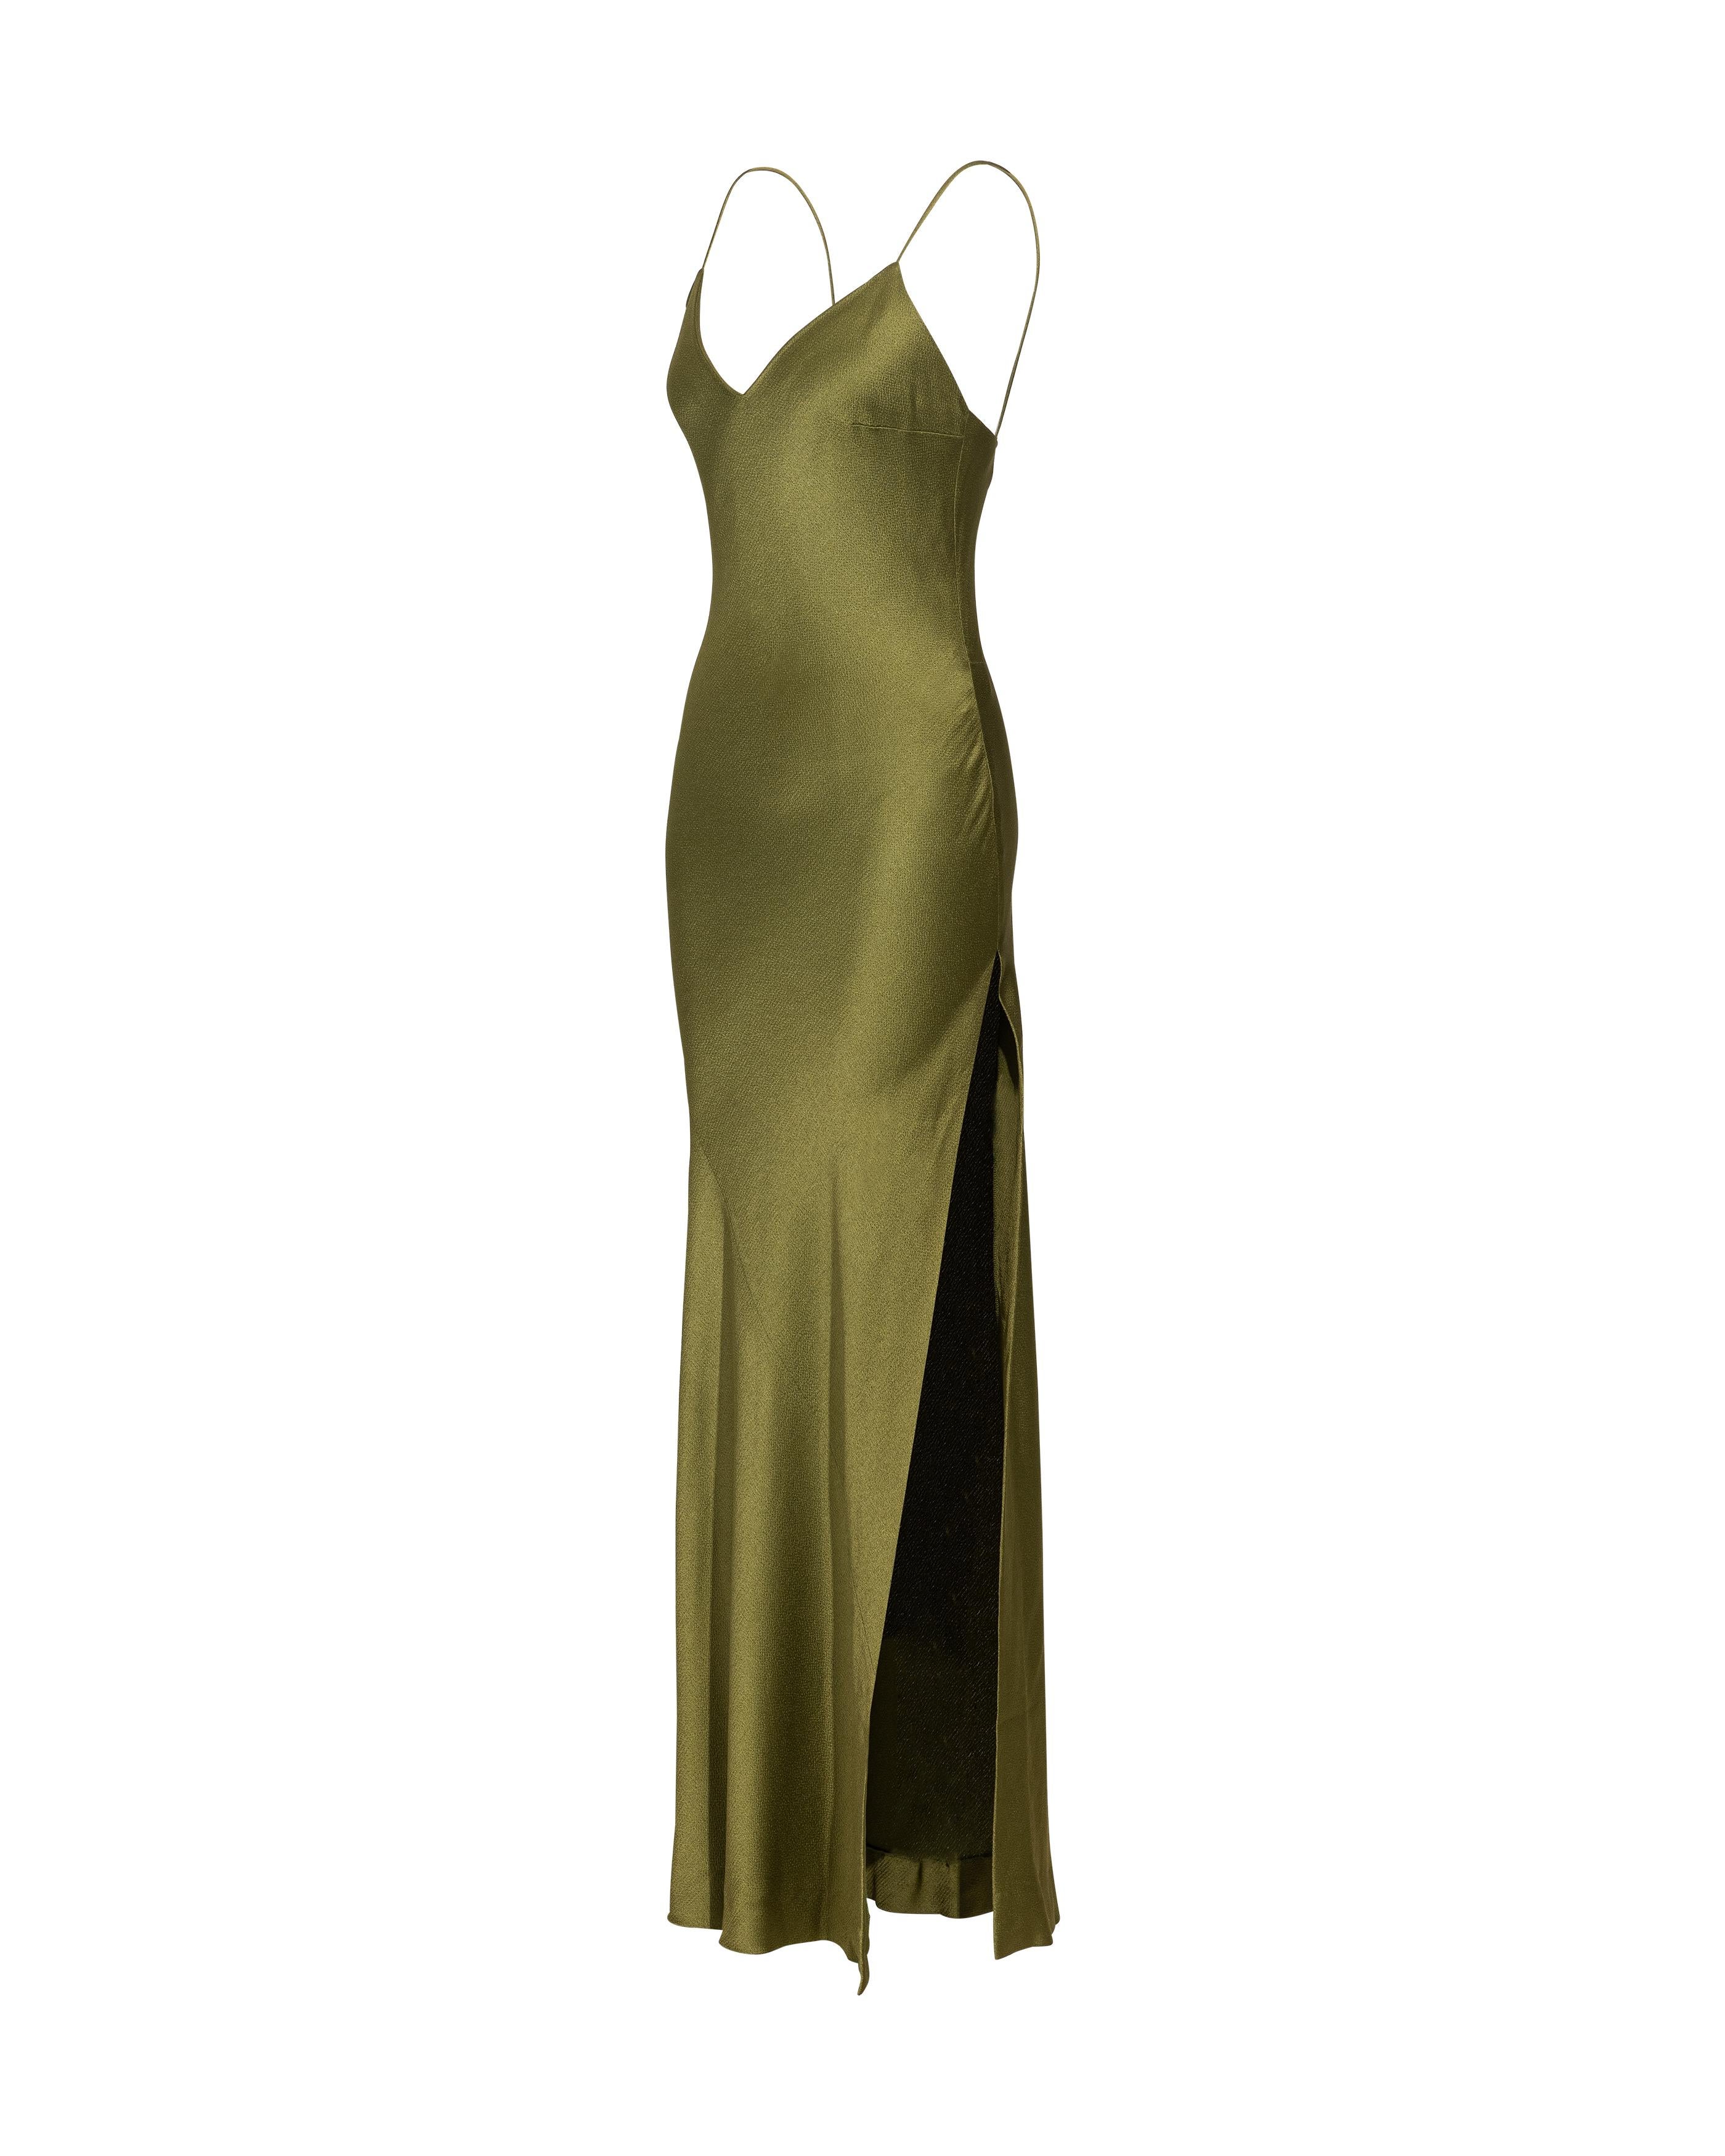 S/S 1999 Christian Dior by John Galliano Olive Green Bias Cut Slip Gown In Excellent Condition For Sale In North Hollywood, CA